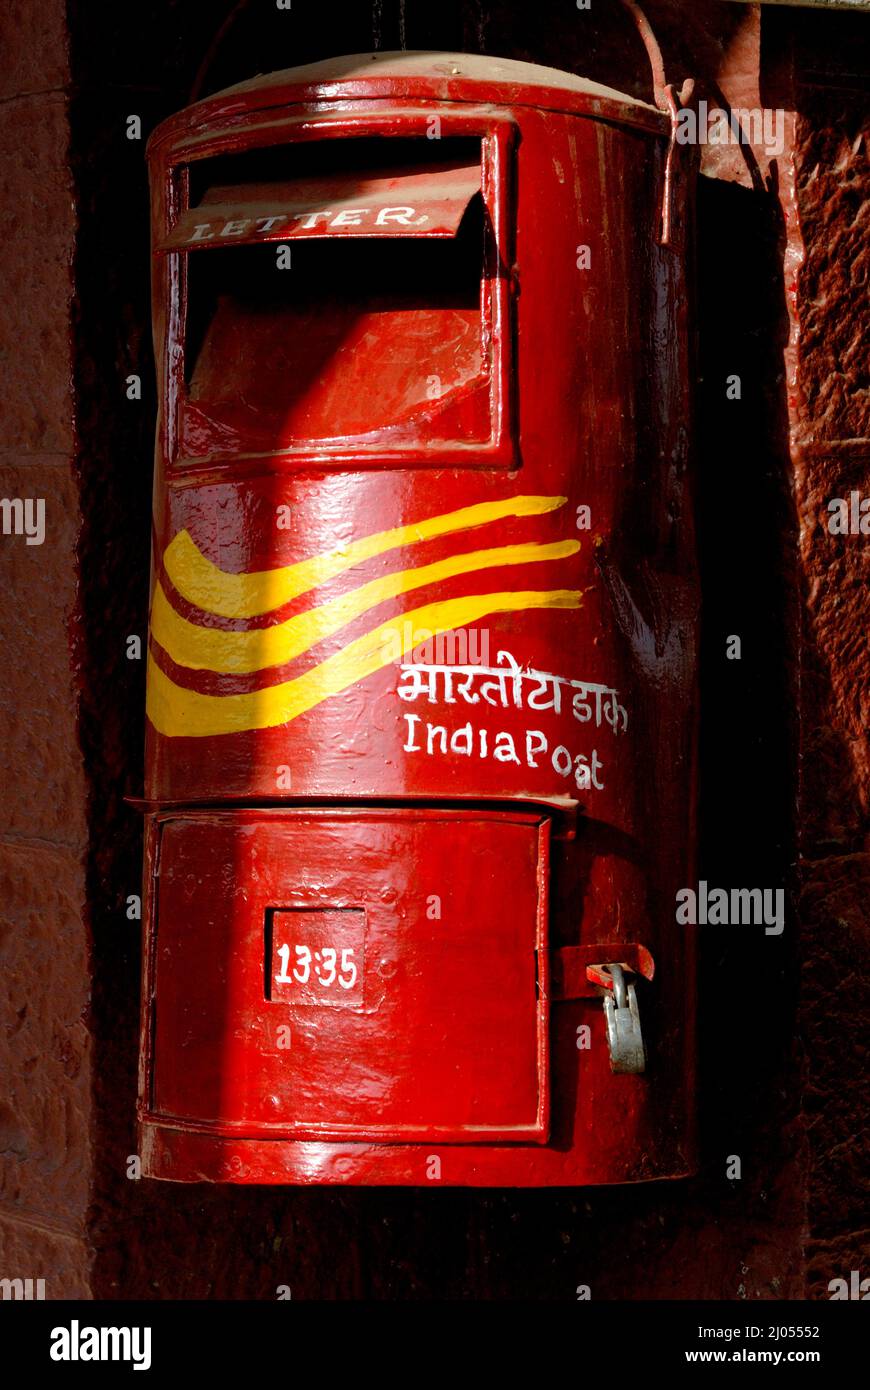 Amreli Gujarat india  Sep. 30 2009  Close up of Traditional red color old Indian mailbox or postbox Letter box at Amreli railway station. Stock Photo